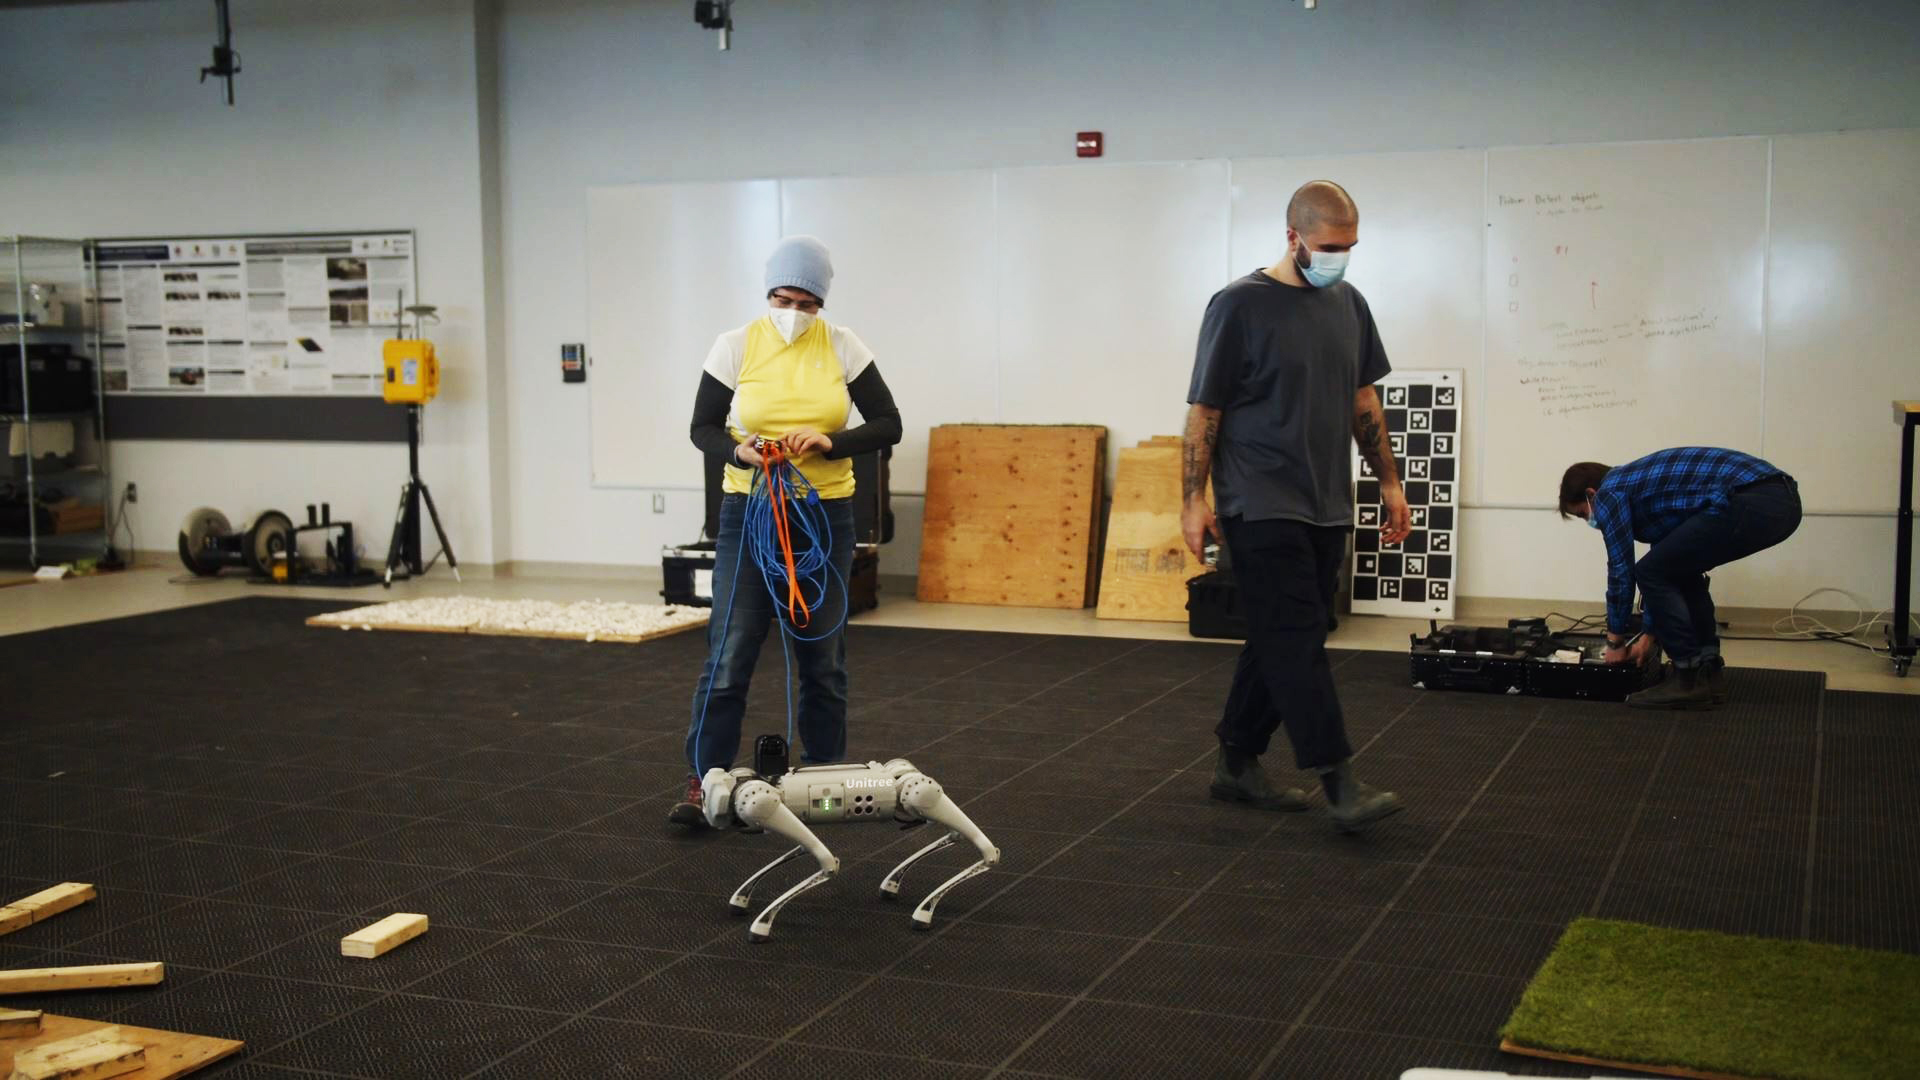 Two Ferment AI resident artists standing on a rubber mat floor. One, female, is holding a remote and controlling a small robotic dog.